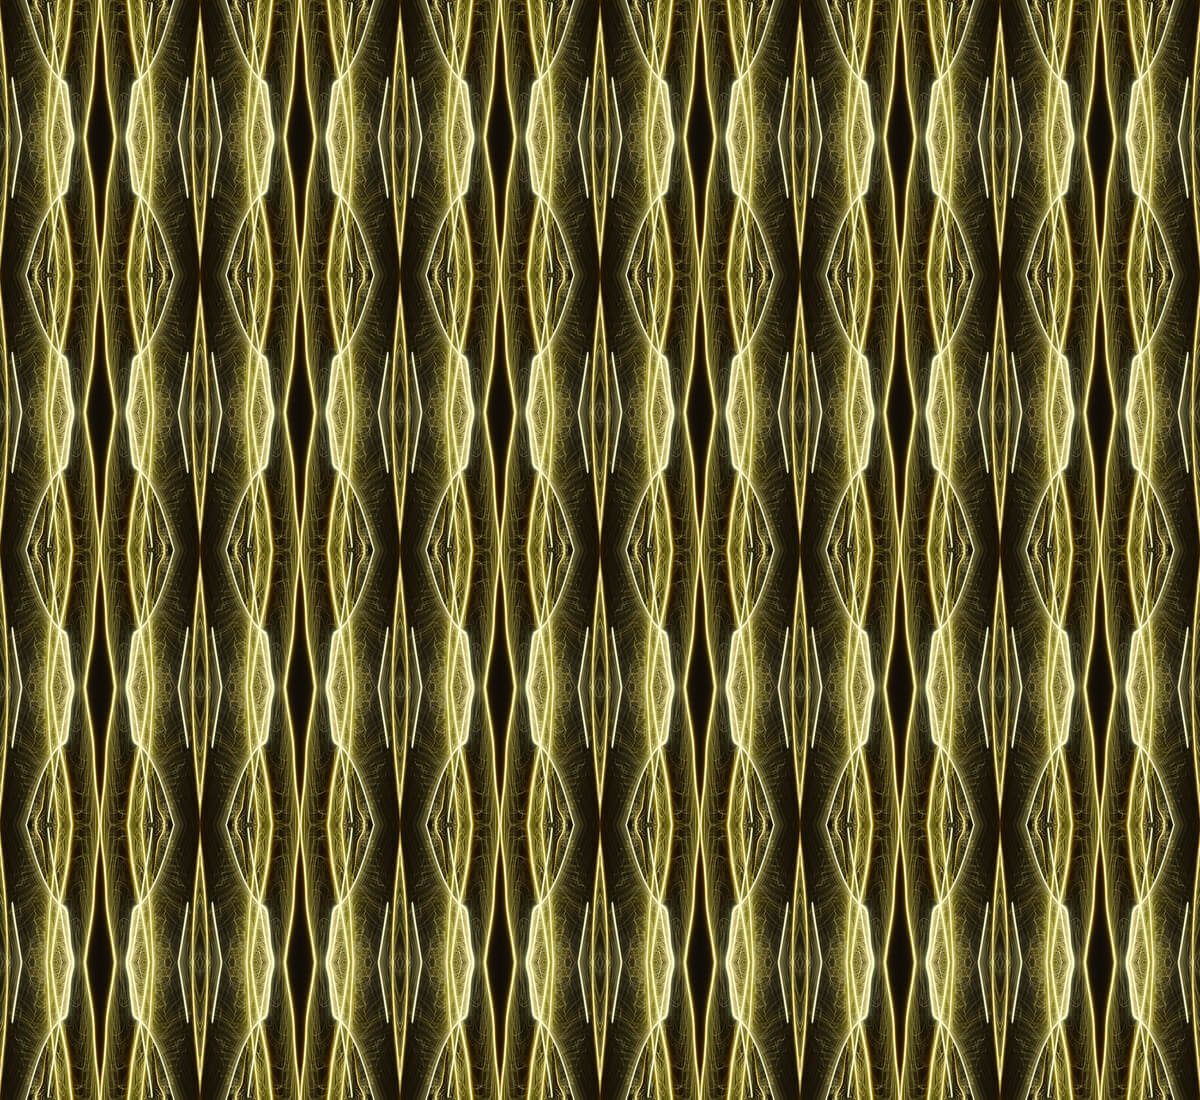 Deco pattern in yellow with black background